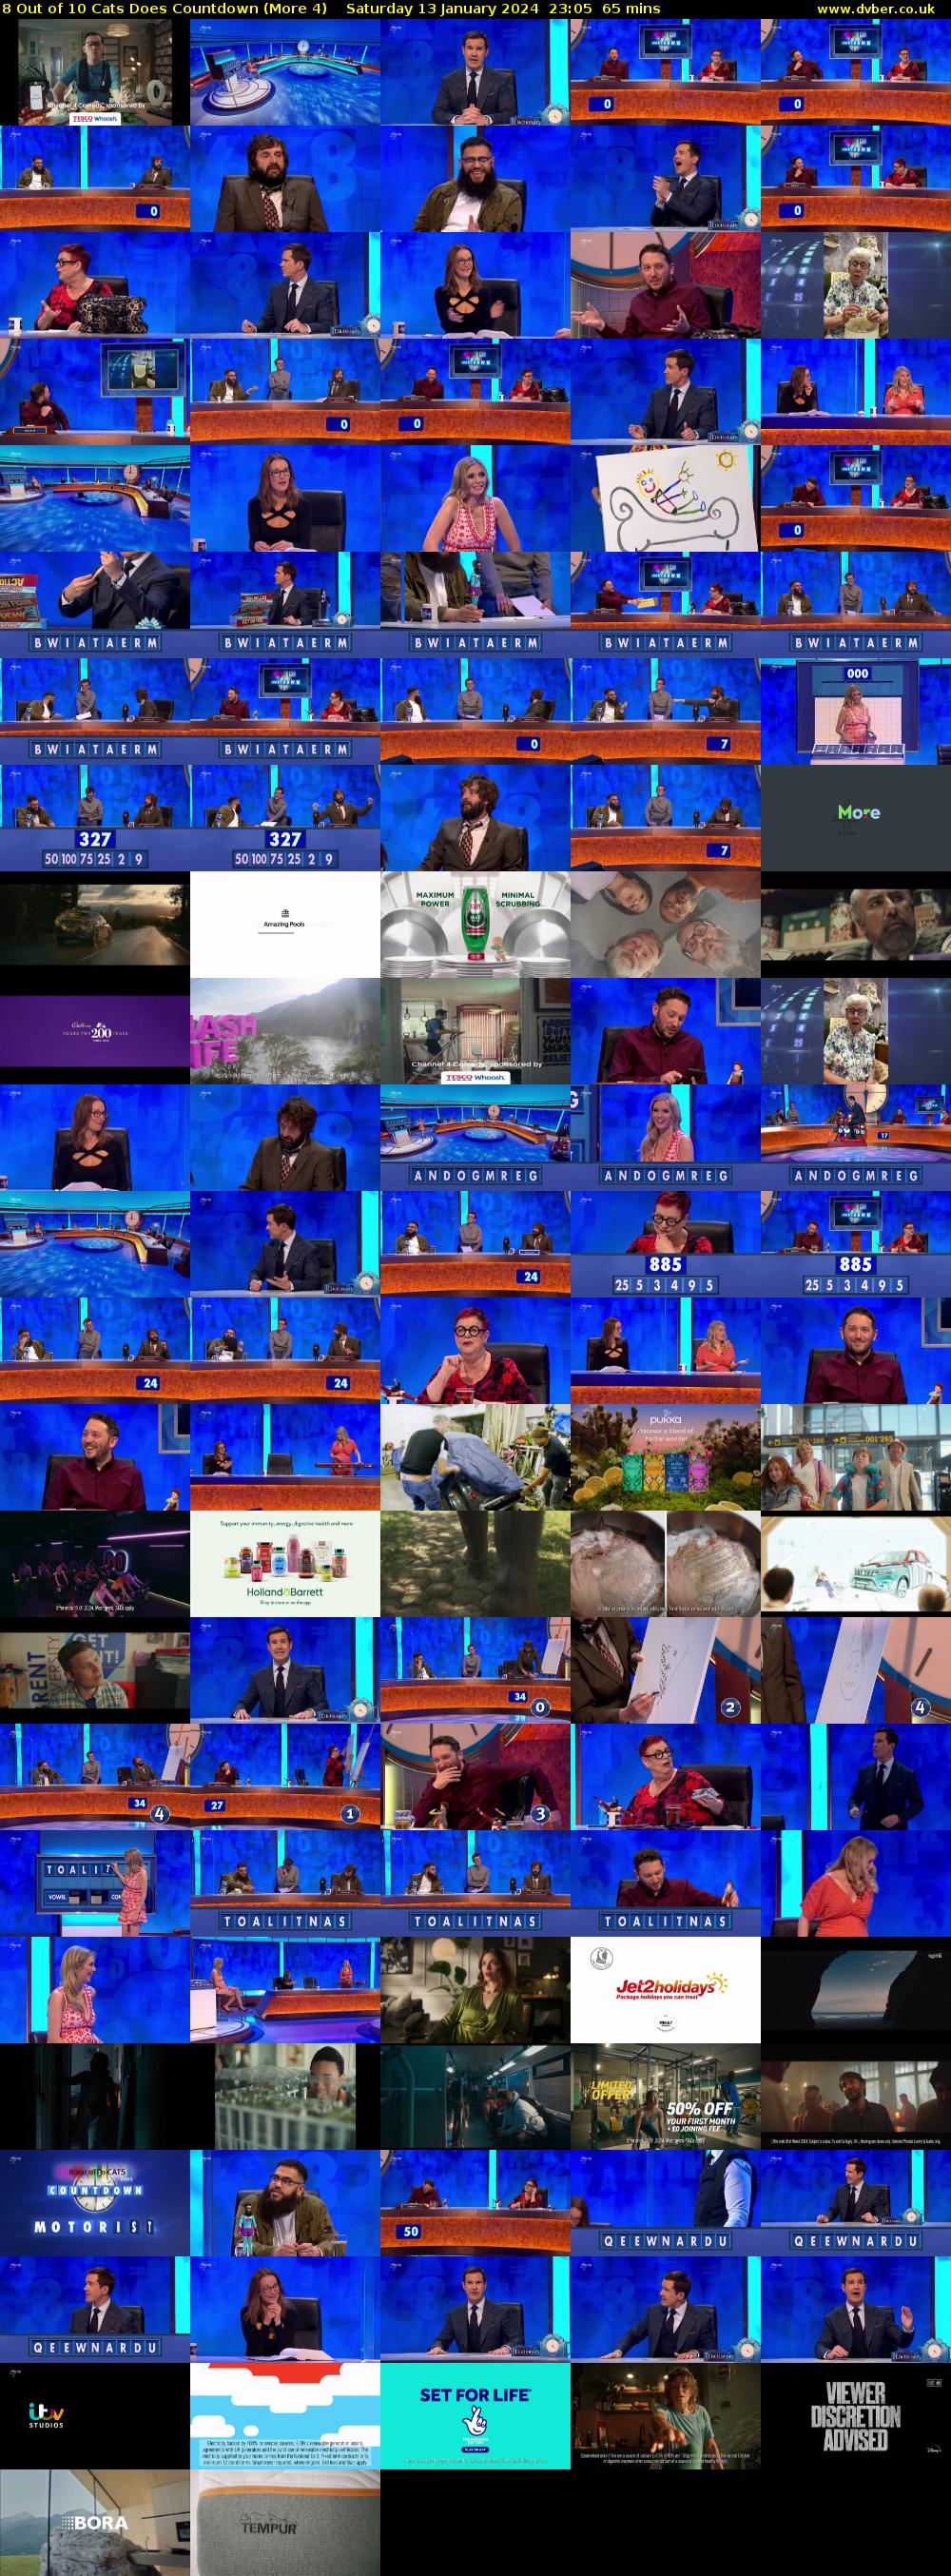 8 Out of 10 Cats Does Countdown (More 4) Saturday 13 January 2024 23:05 - 00:10